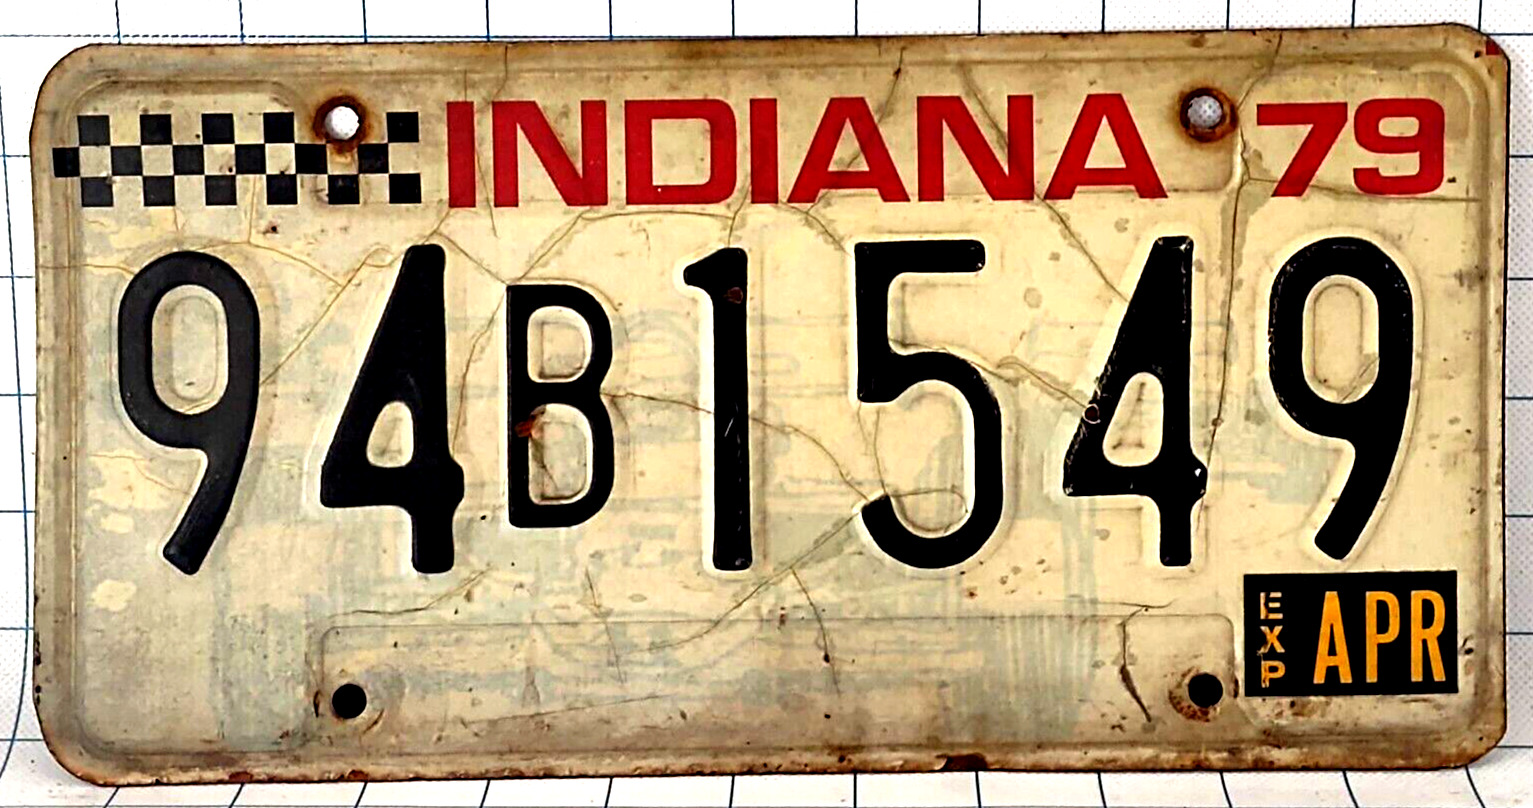 Indiana Lake County 1979 Race Car Design Metal Expired License Plate 94B1549